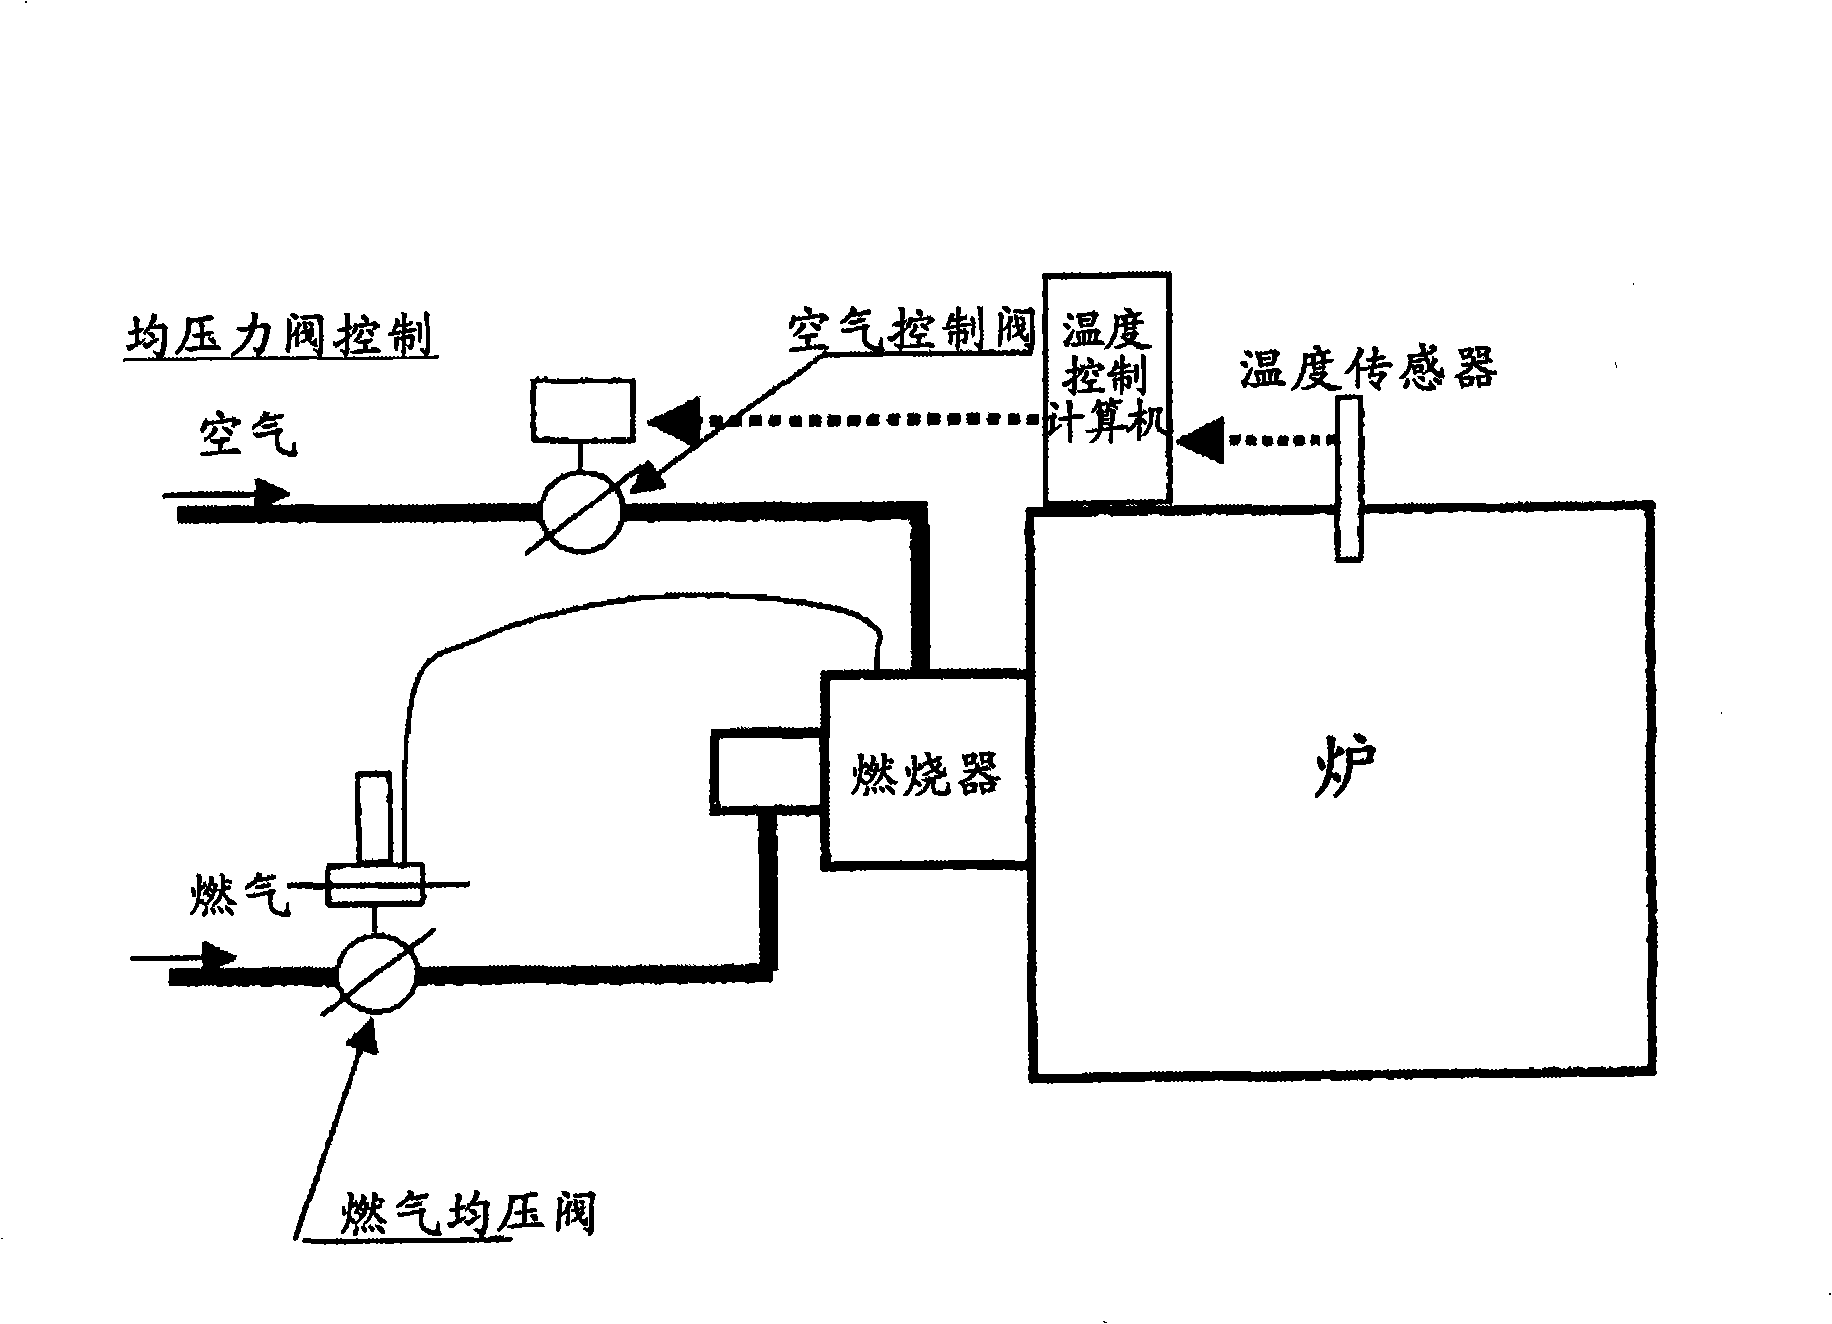 Air-fuel ratio control system of combustion heating furnace